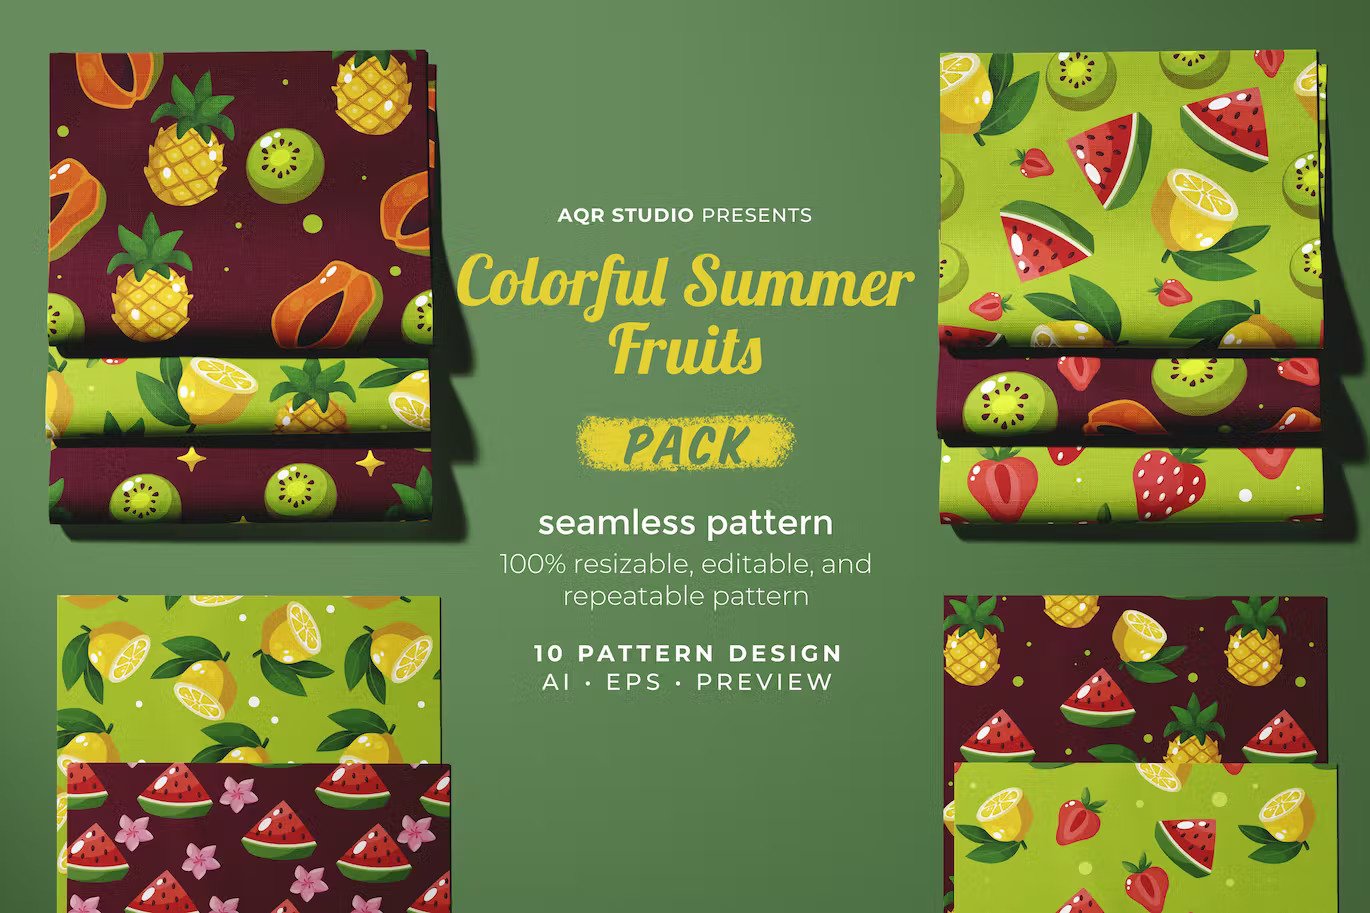 A colorful summer fruits pattern set